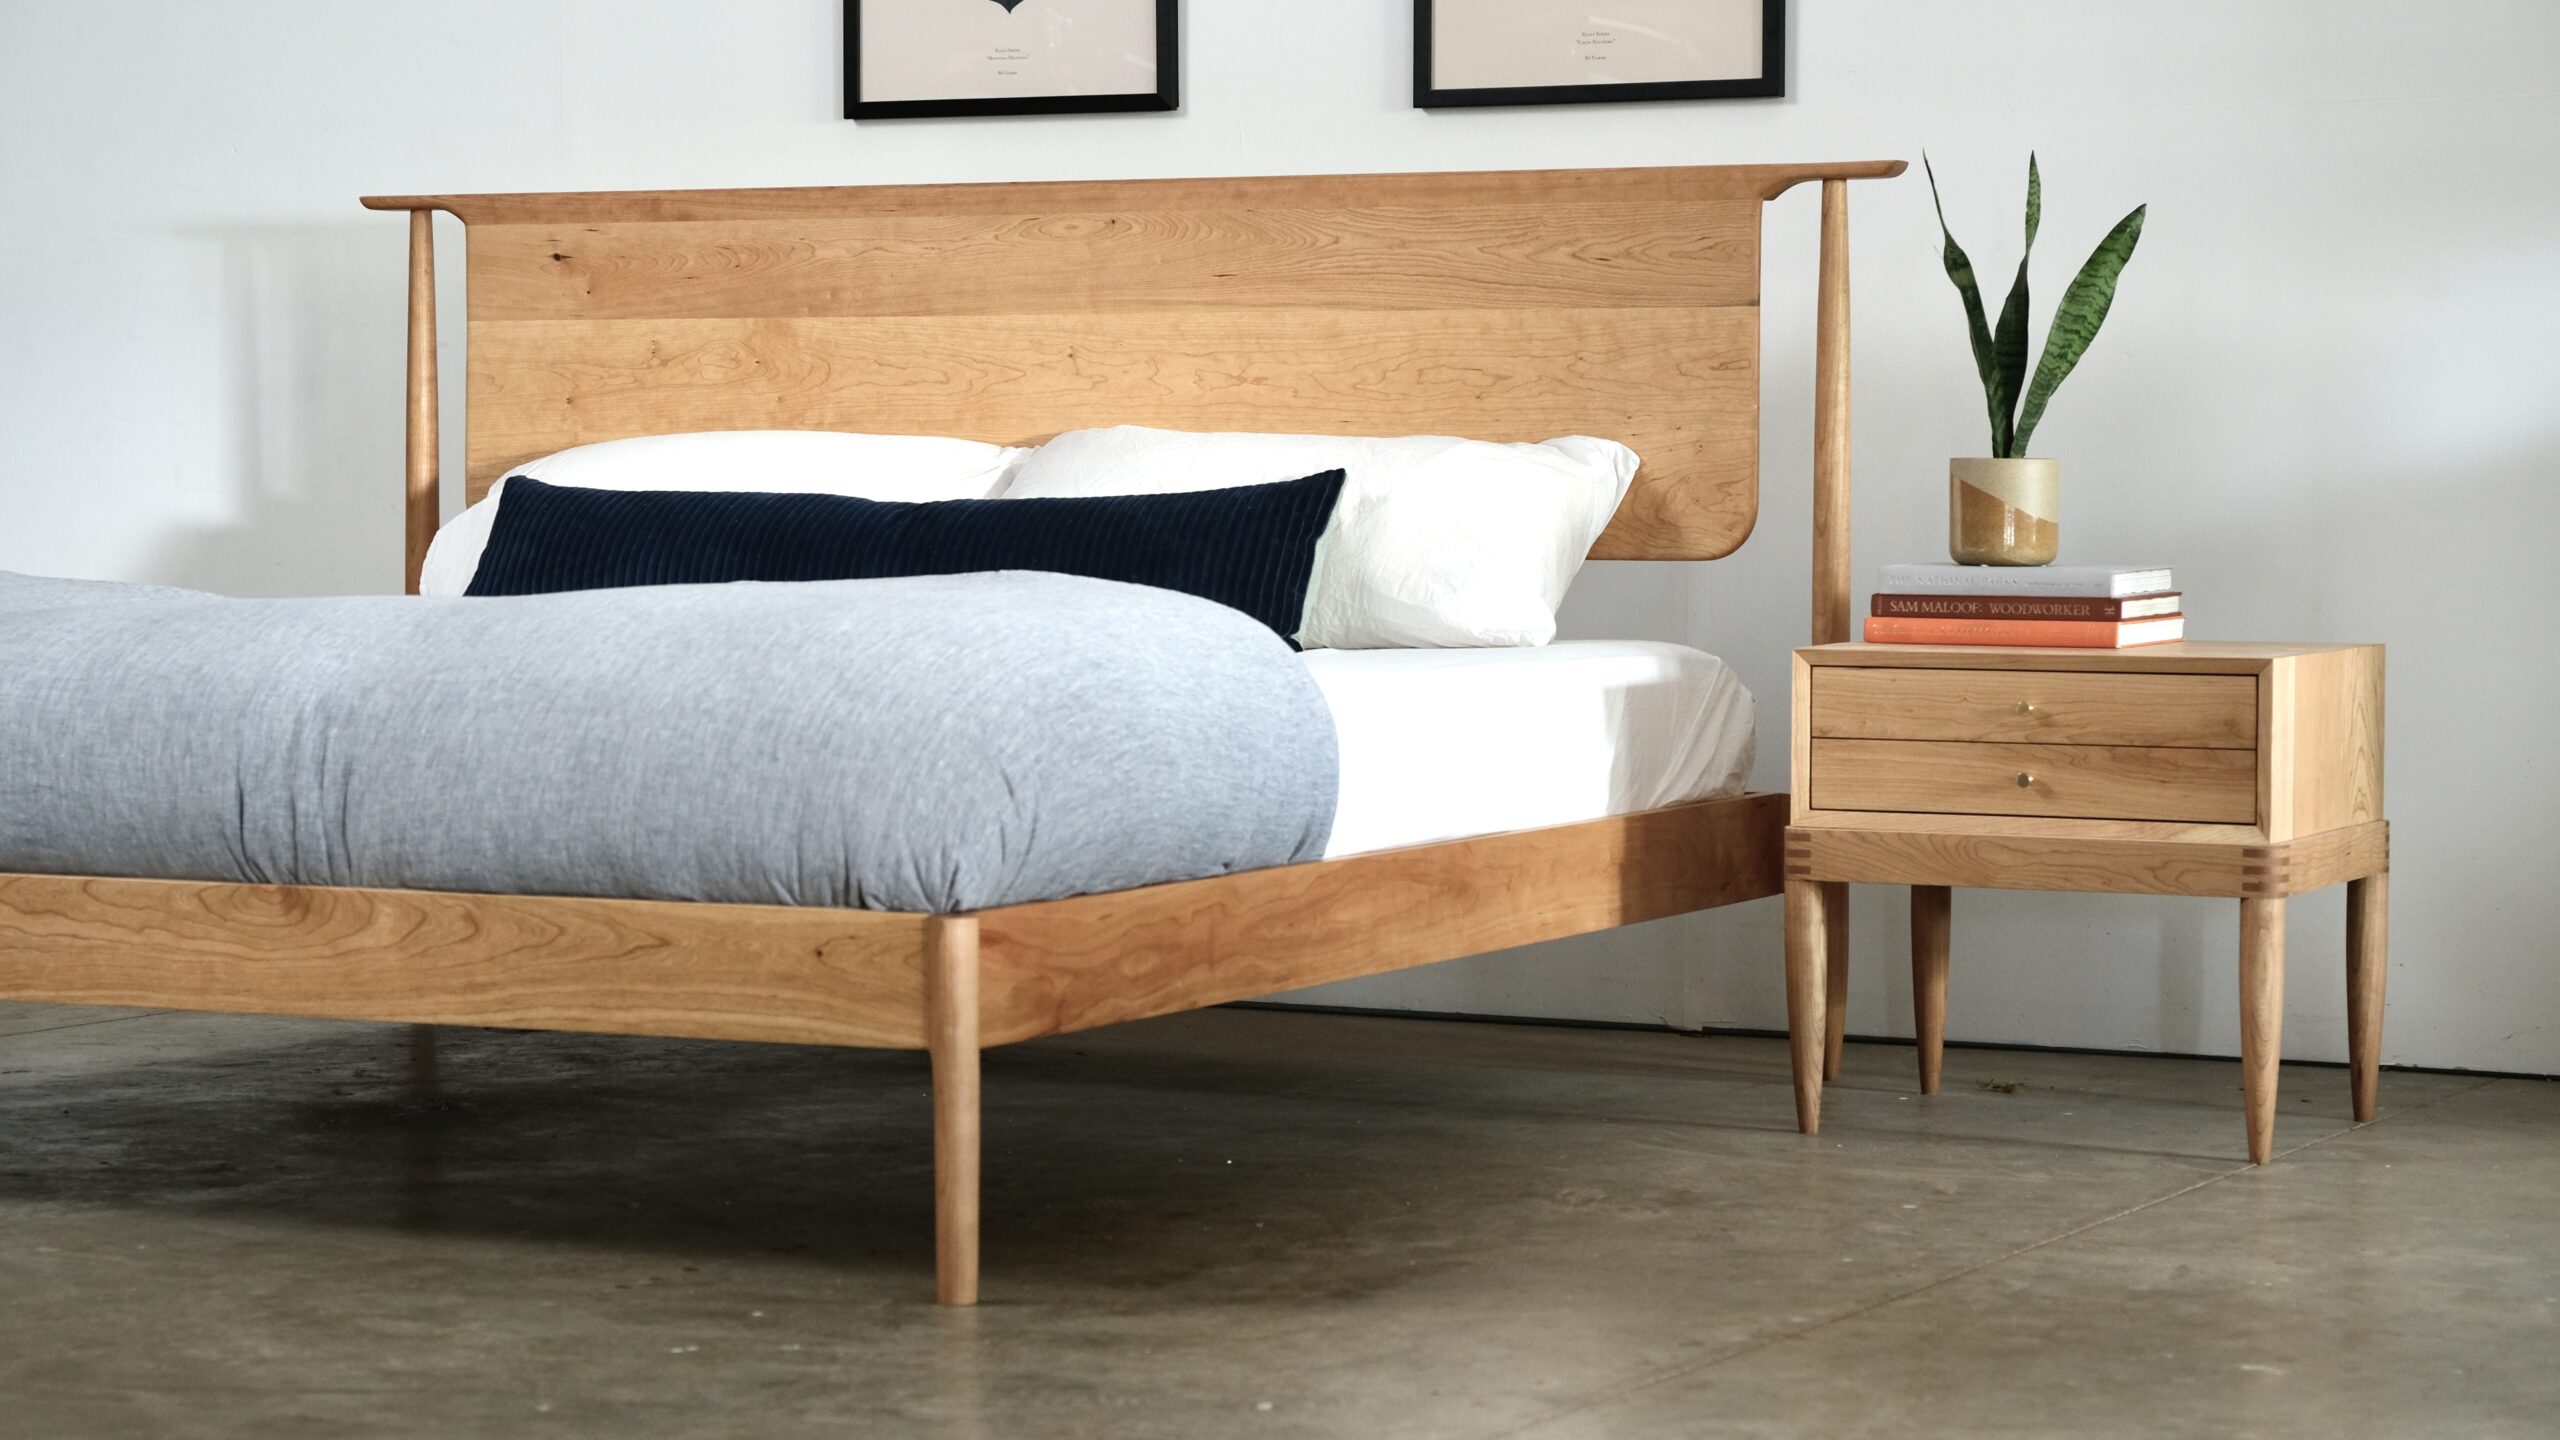 A mid century modern bed and nightstand made from solid cherry.